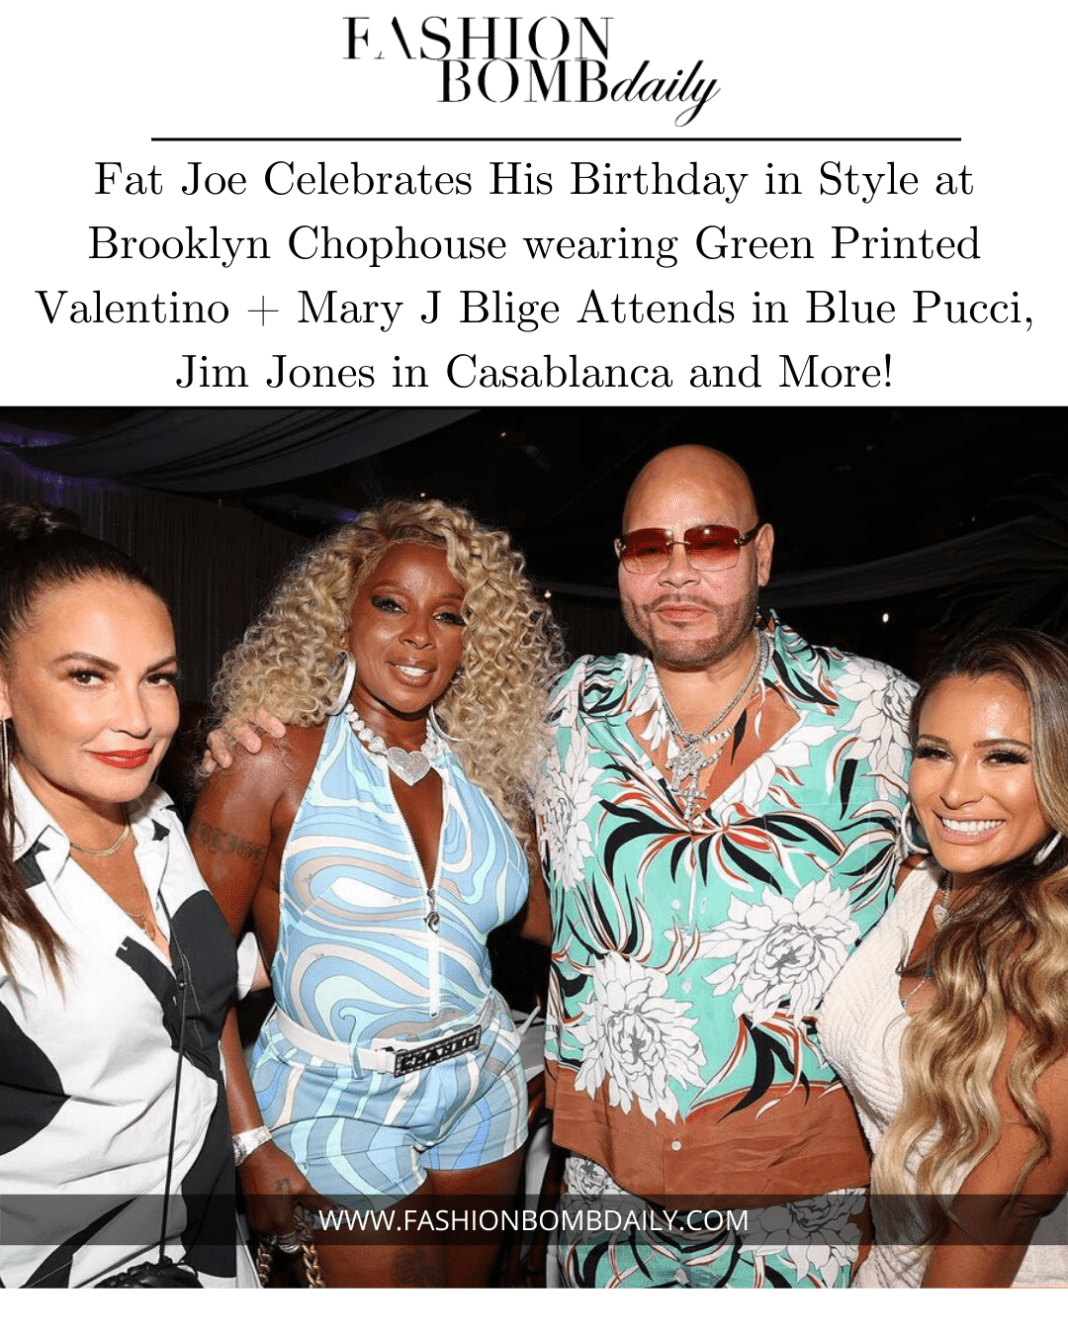 Fat Joe Celebrates His Birthday in Style at Brooklyn Chophouse wearing Green Printed Valentino + Mary J Blige Attends in Blue Pucci, Jim Jones in Casablanca and More!